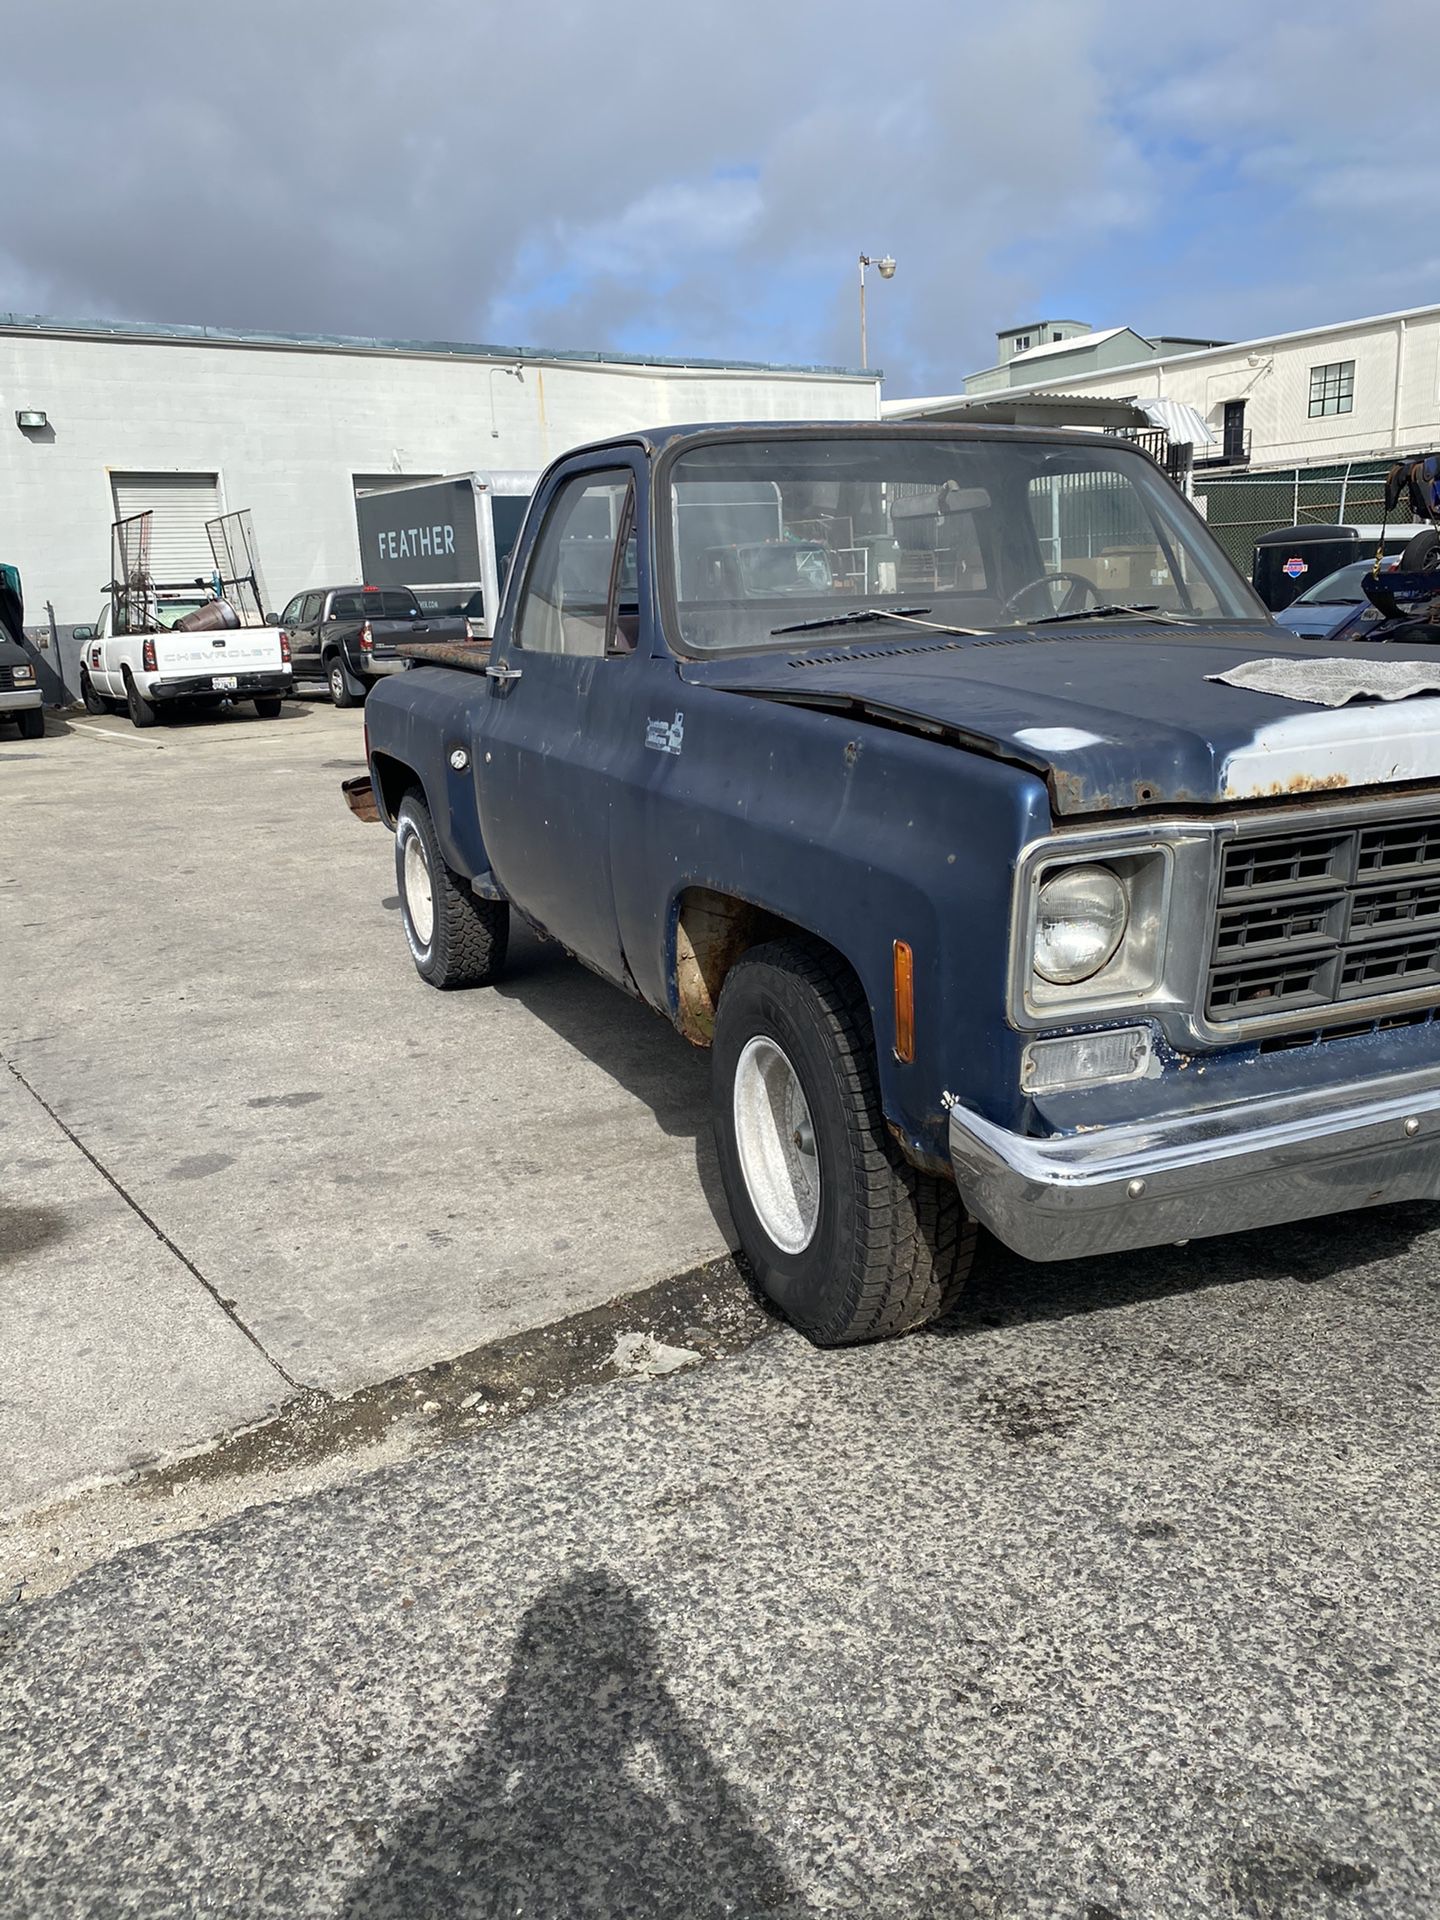 1977 Chevy pick up truck parts